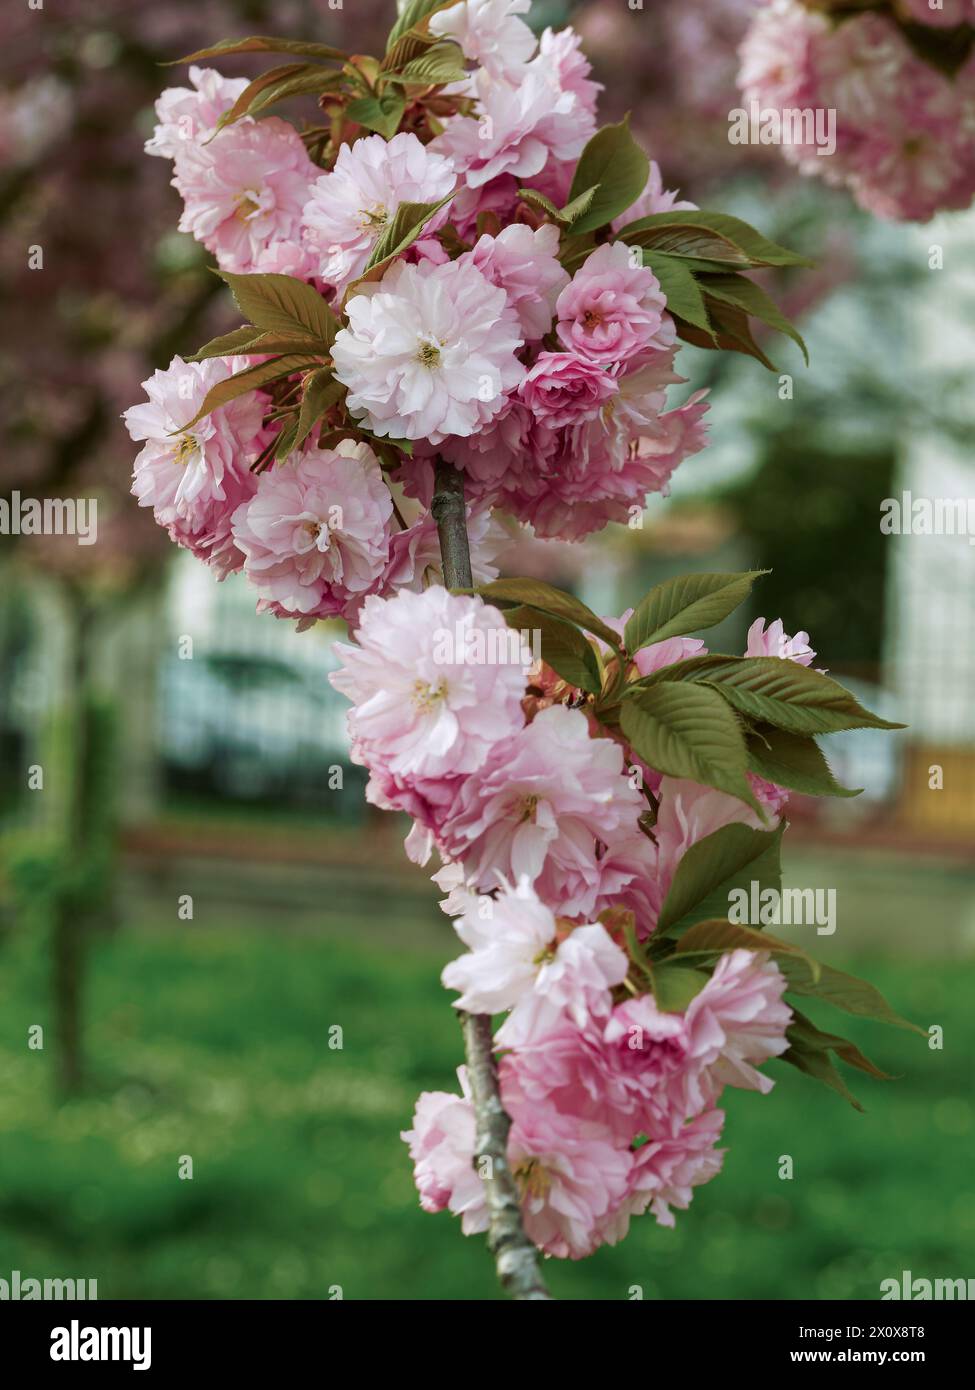 bouquet of JAPANESE CHERRY flowers on a branch in a natural environment, white and pink flowers close up Stock Photo